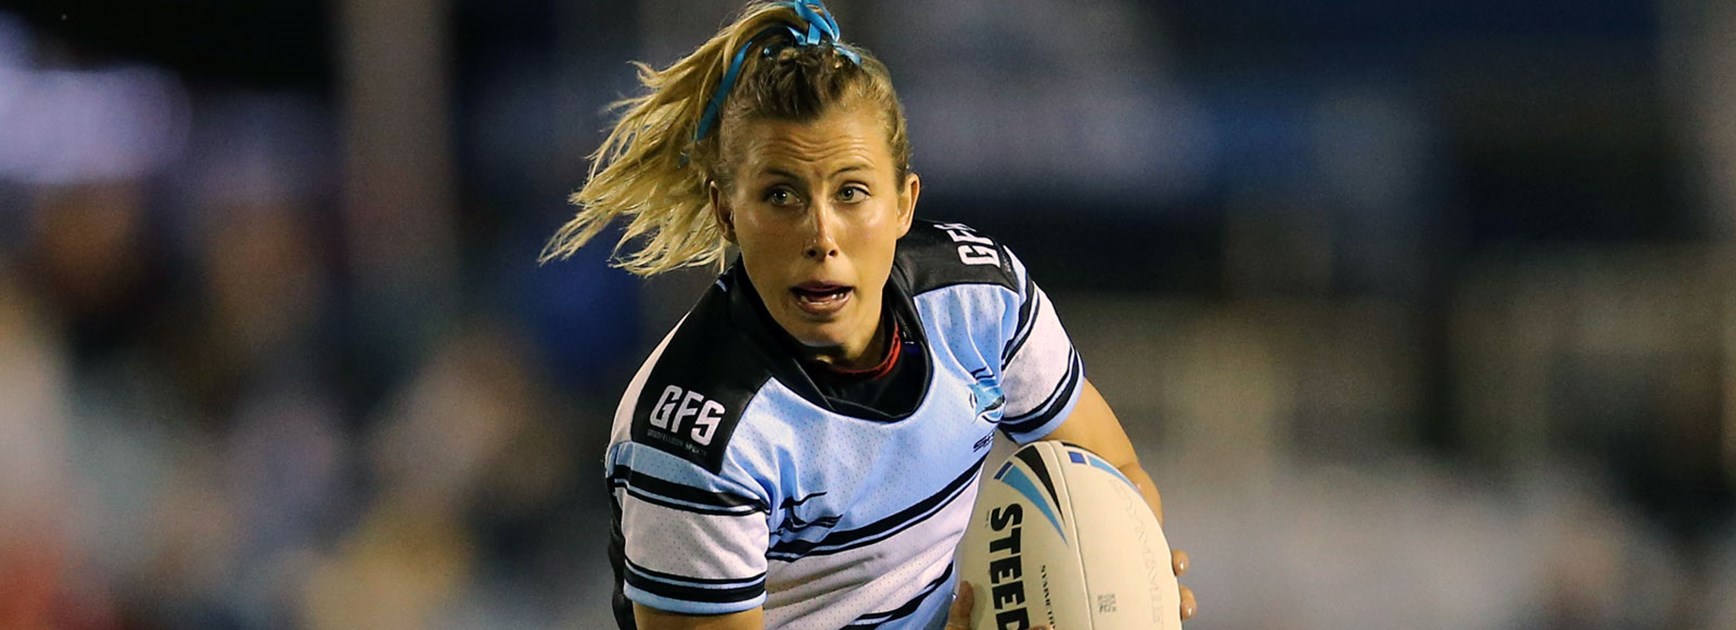 Samantha Bremner scored the match-winner as the Sharks downed the Dragons in the women's Nines clash at Southern Cross Group Stadium.